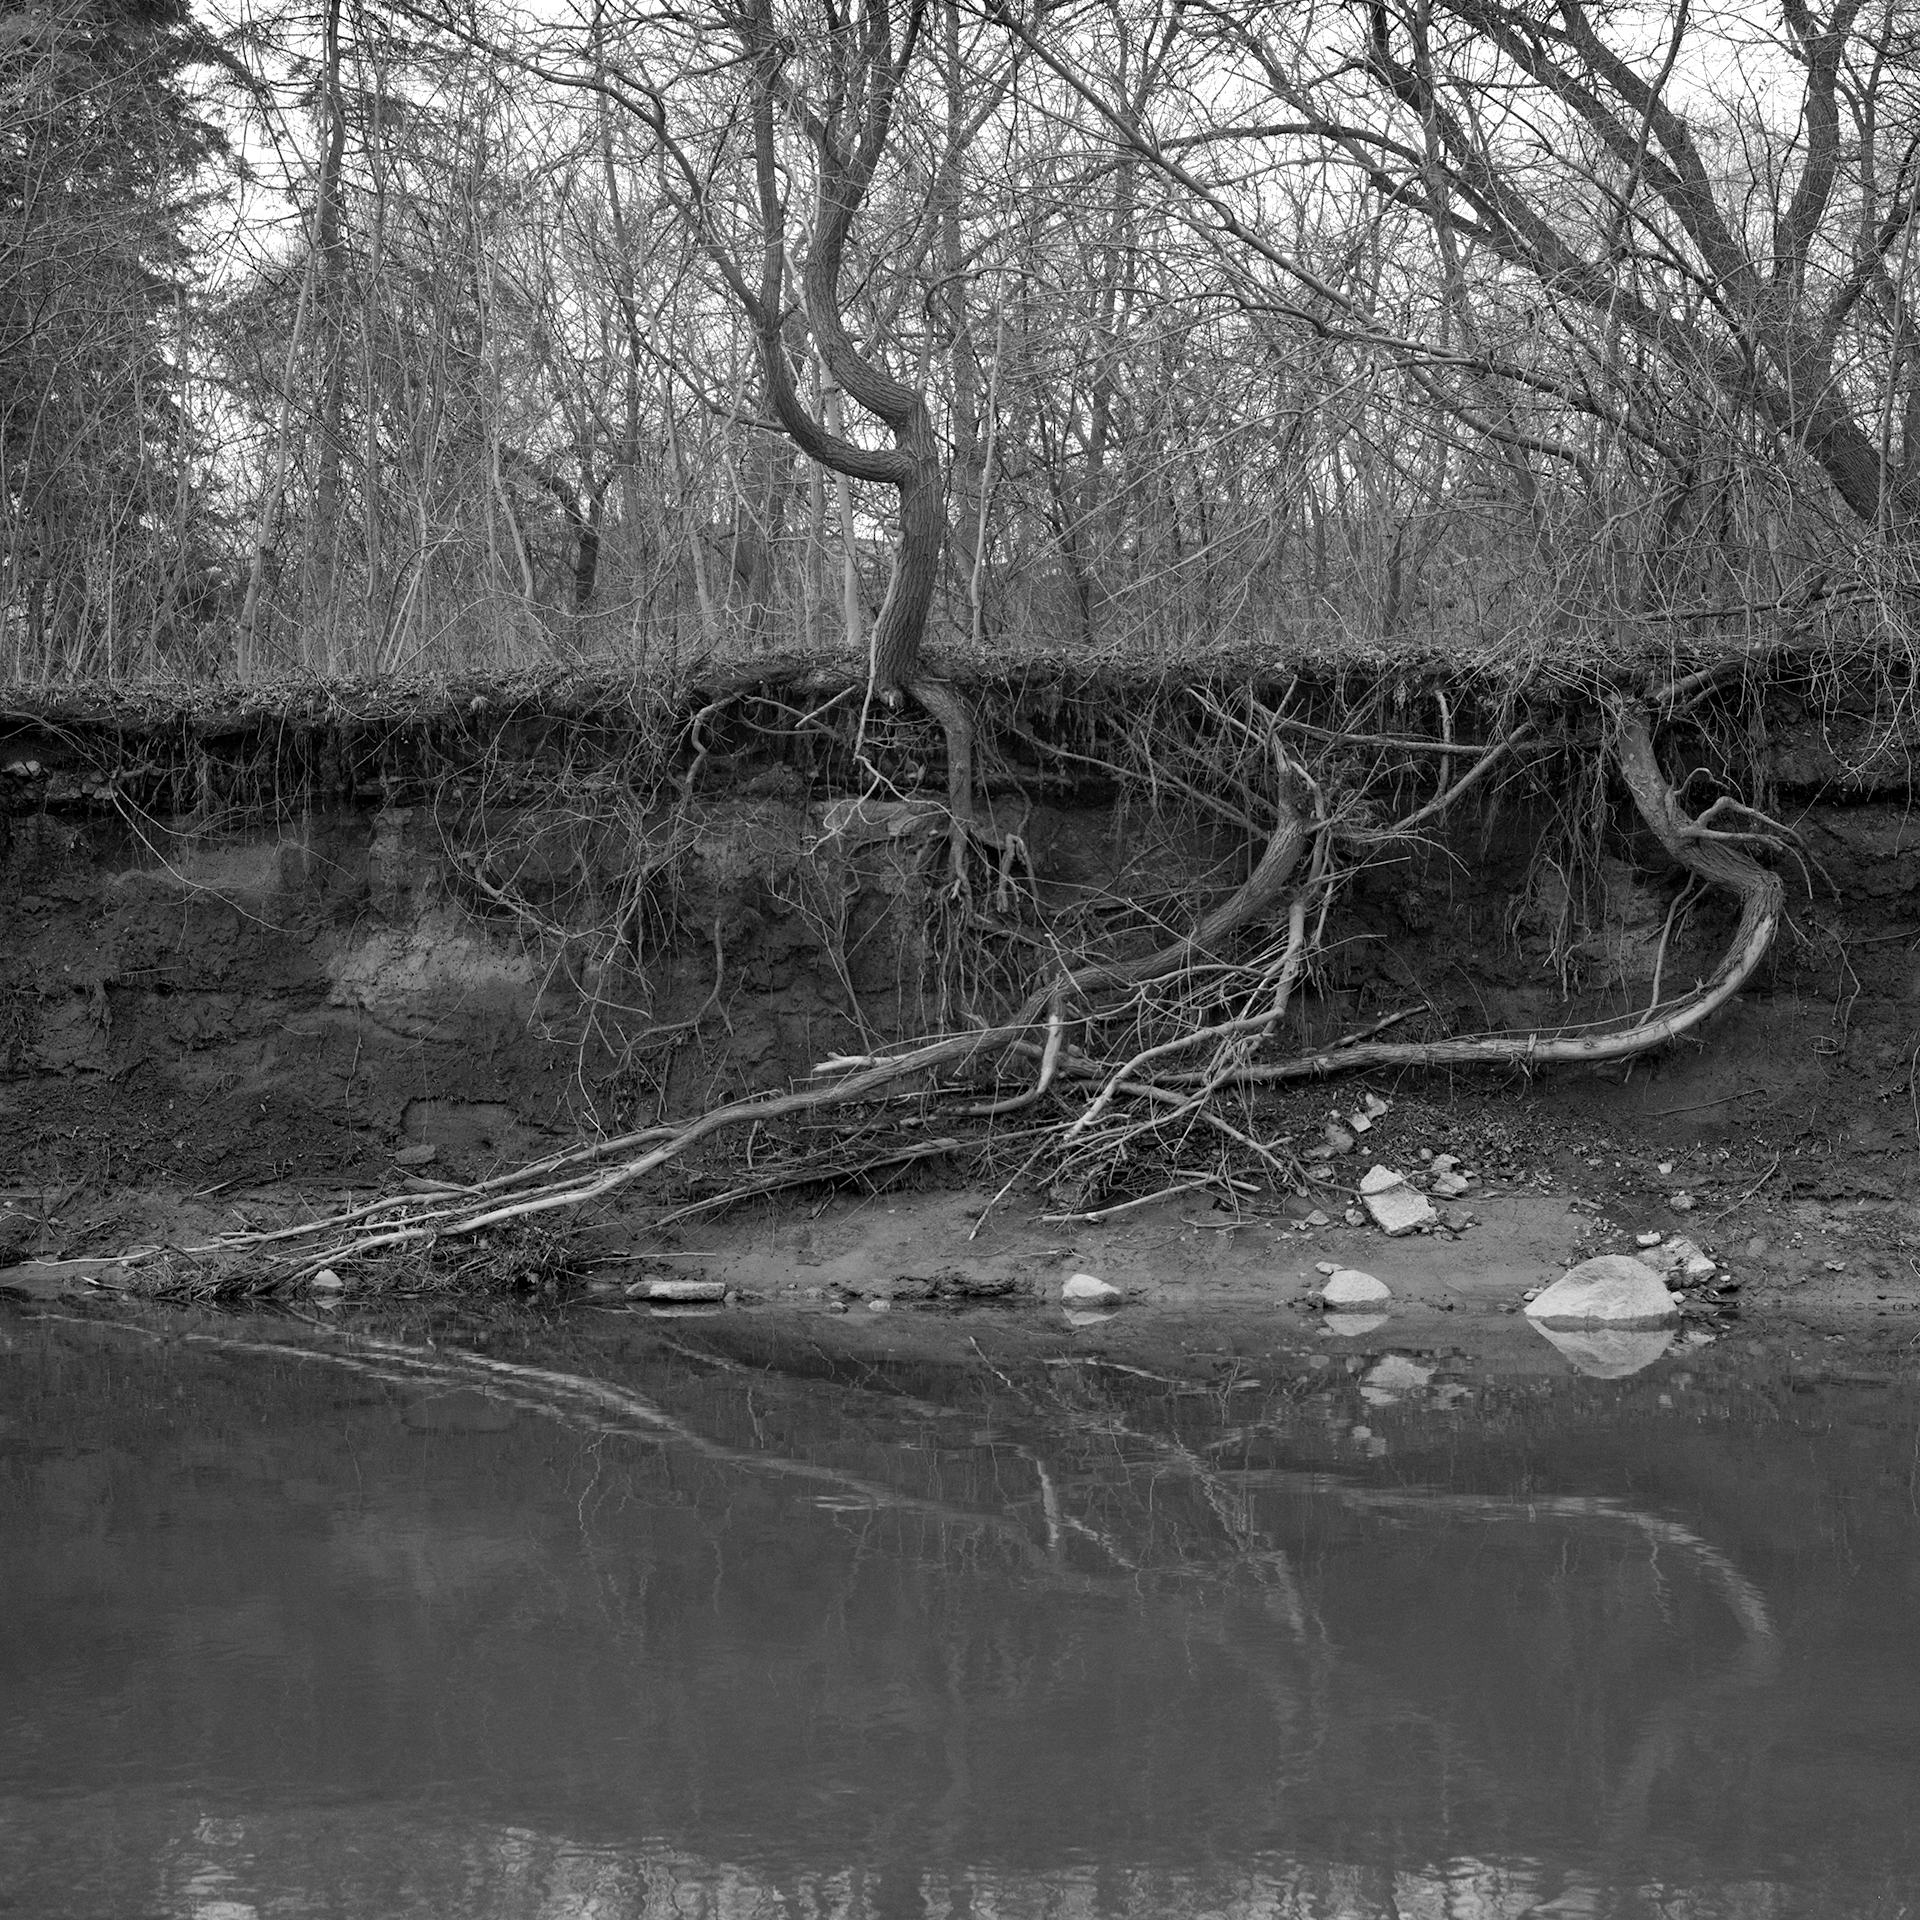 Where The River Runs # 11: A square black and white photograph of an eroding riverside. Water is seen in the foreground, the forest is seen behind, and the roots from the trees above protrude out from the soil below, reaching toward the water.